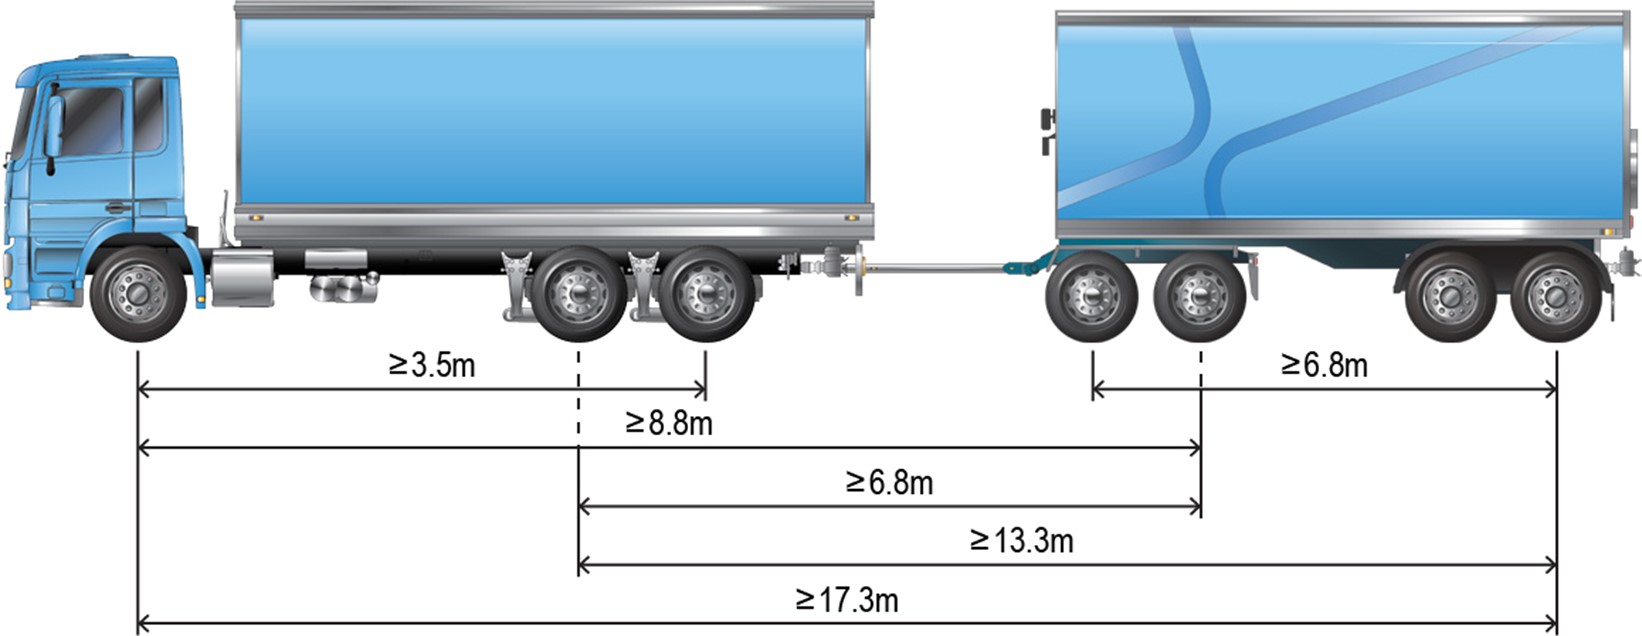 An eligible truck and 4-axle dog trailer